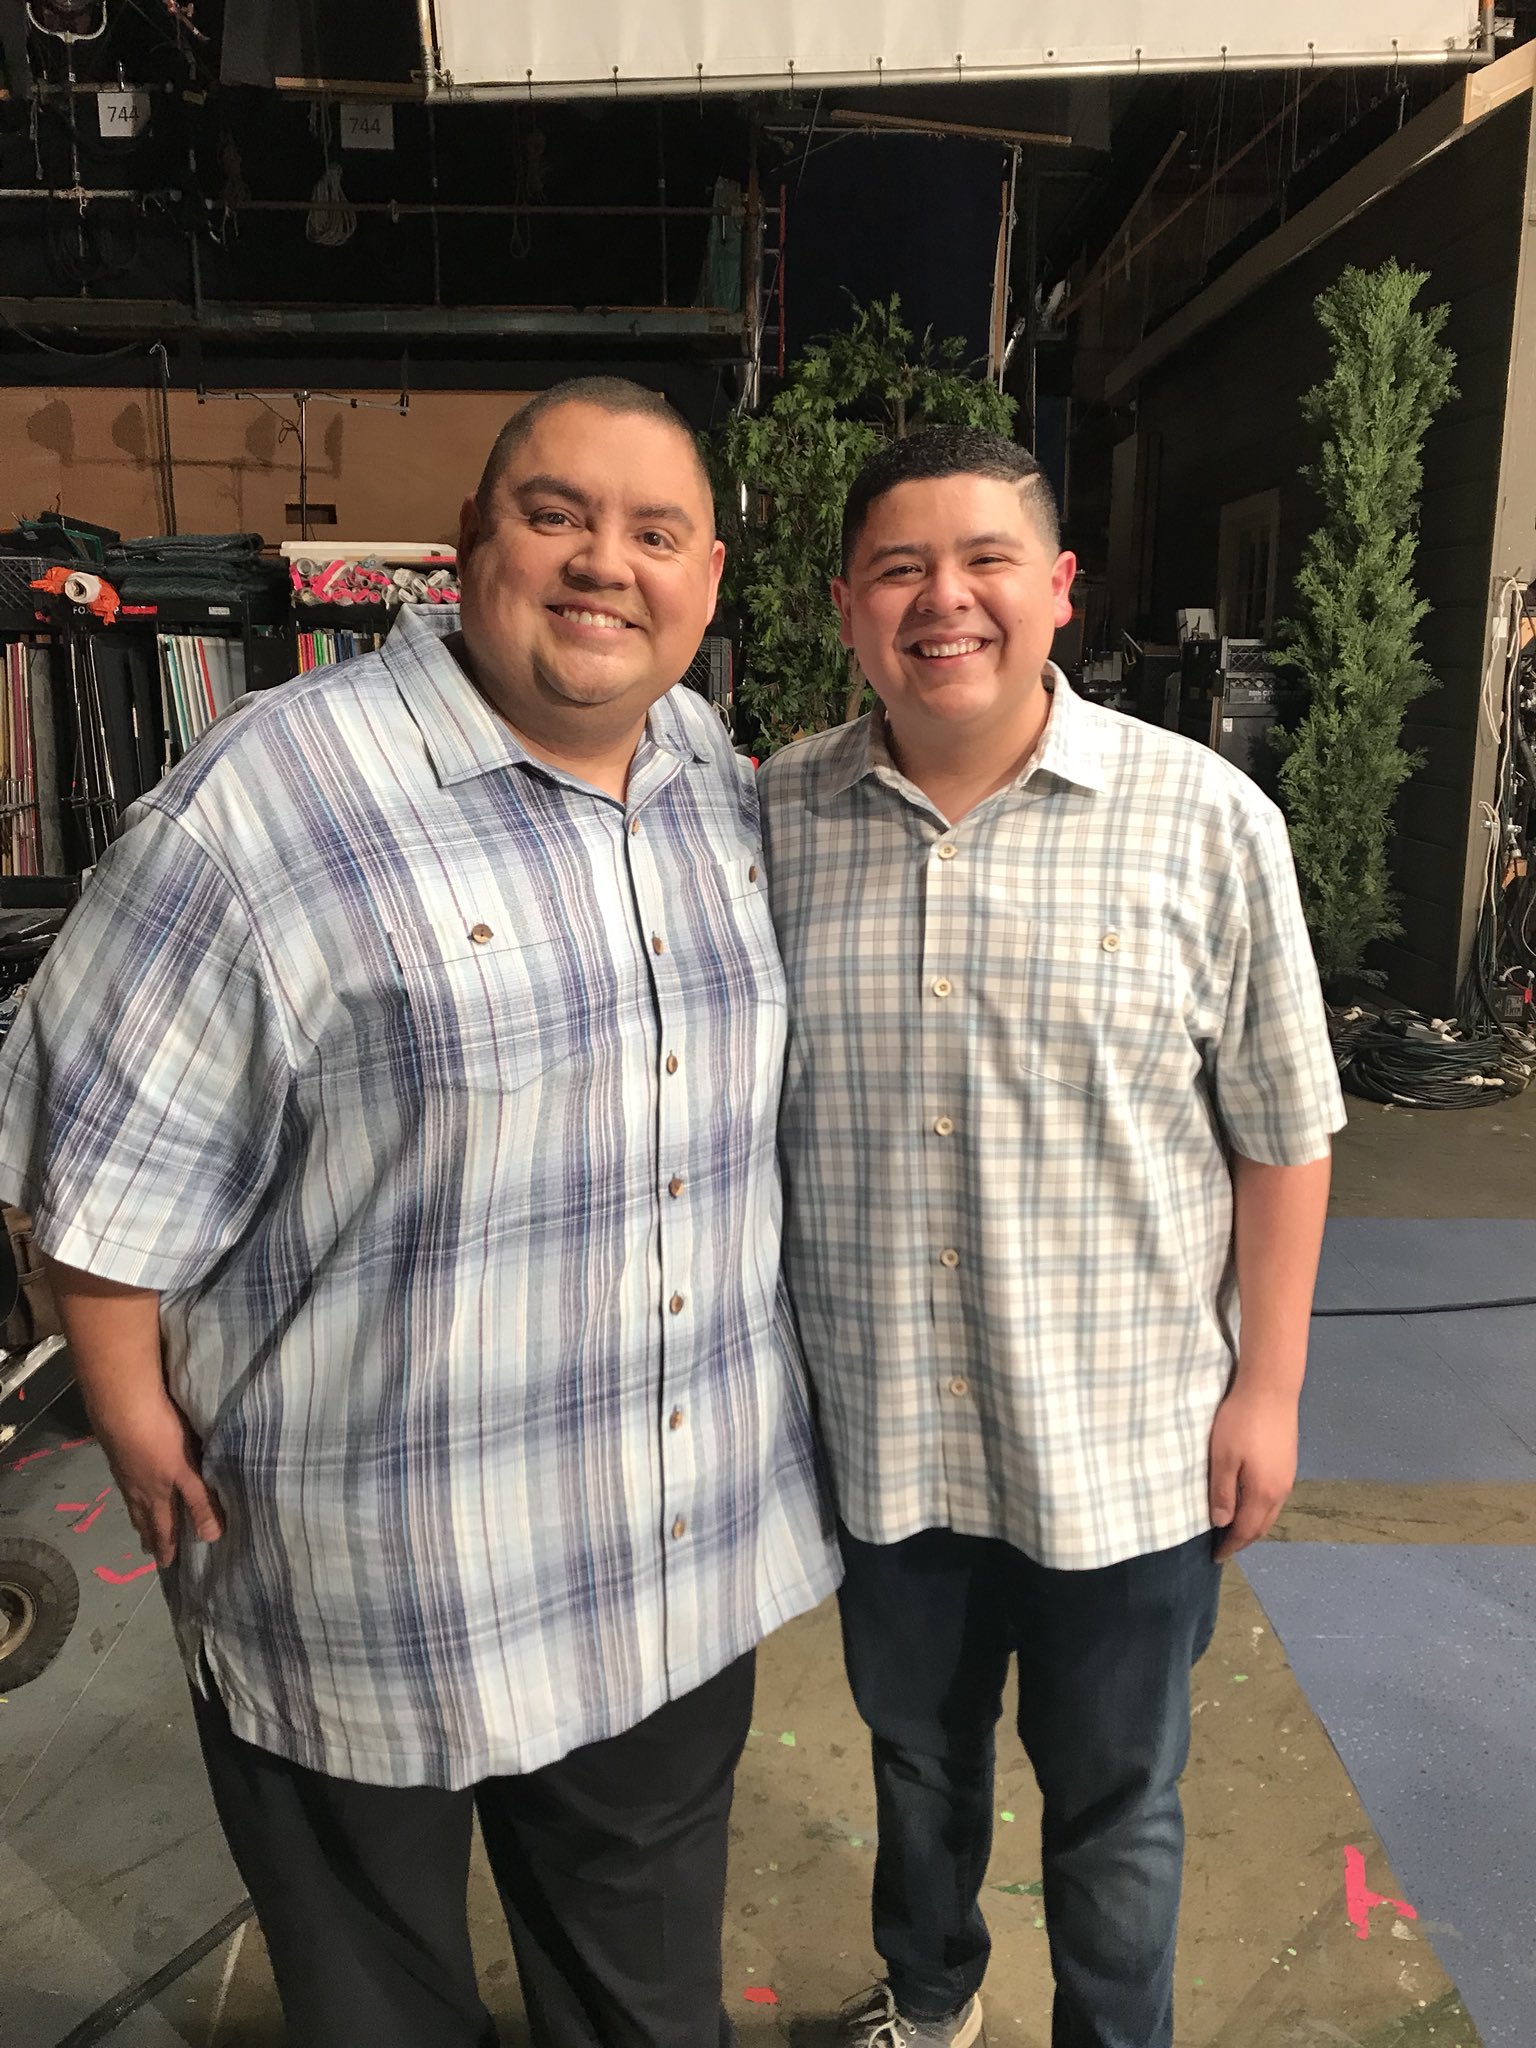 Rico Rodriguez Tonight S All New Modernfamily Introduces Gloria S Ex Fluffyguy And Reveals A Secret That Could Change The Family Forever T Co 09vcbvllff Twitter